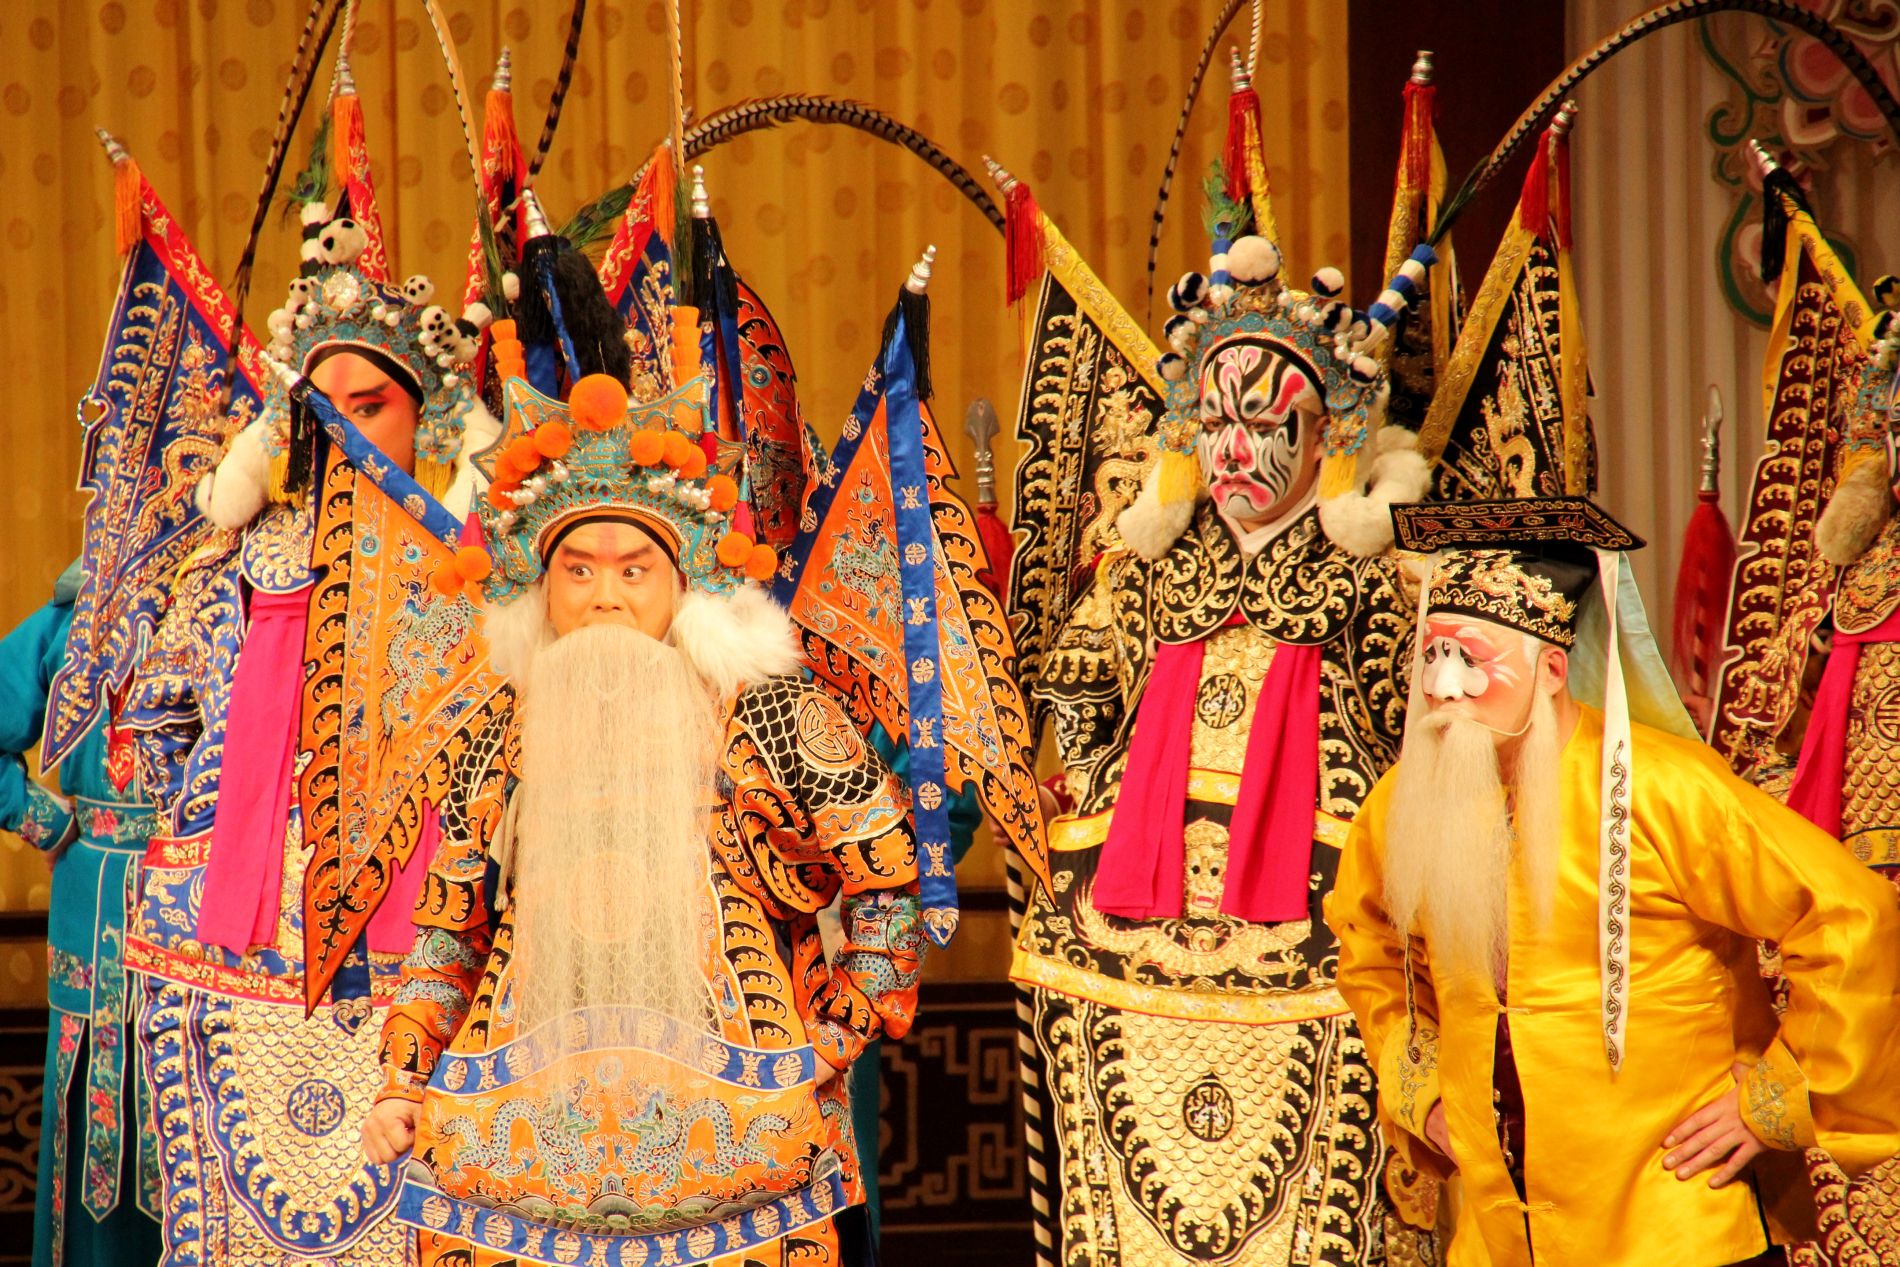 Actors perform during a Beijing opera at the Yifu Theatre in Shanghai, China.